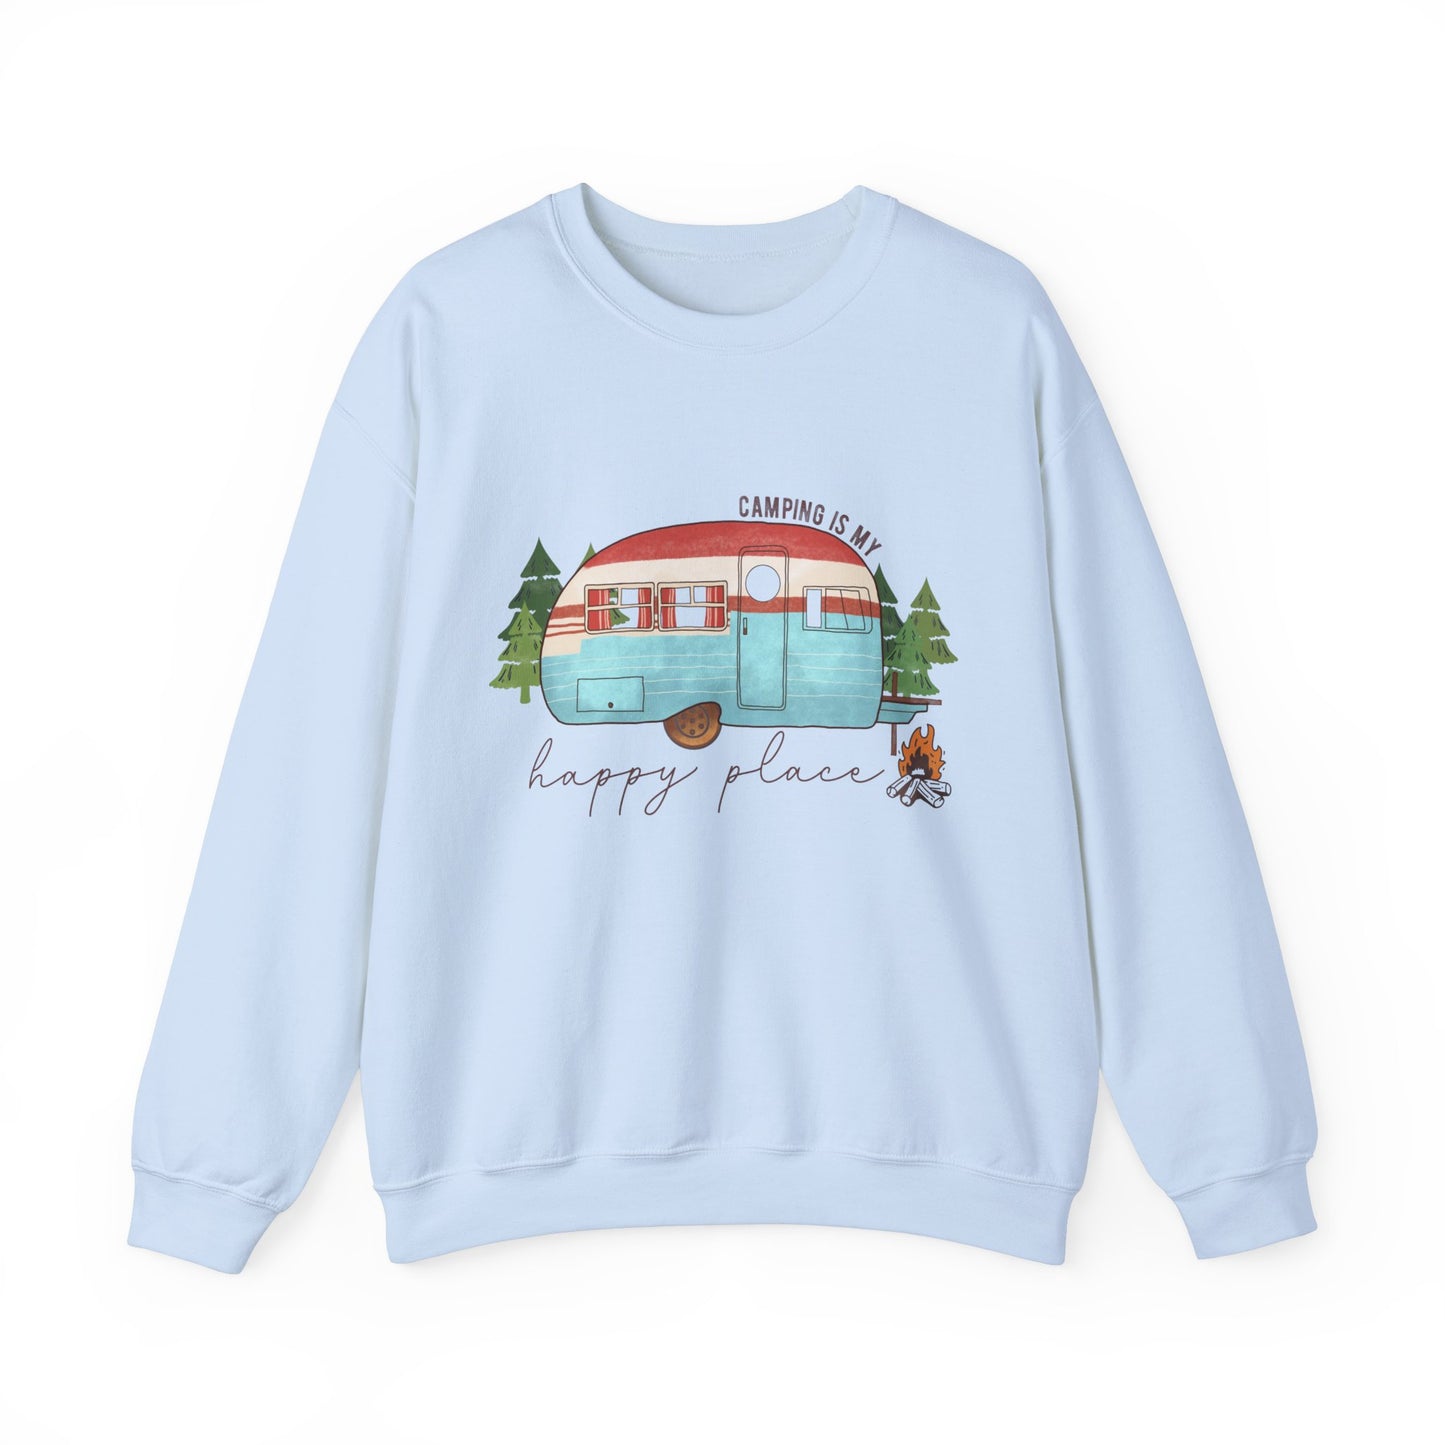 Camping is my happy place Adult Unisex Sweatshirt